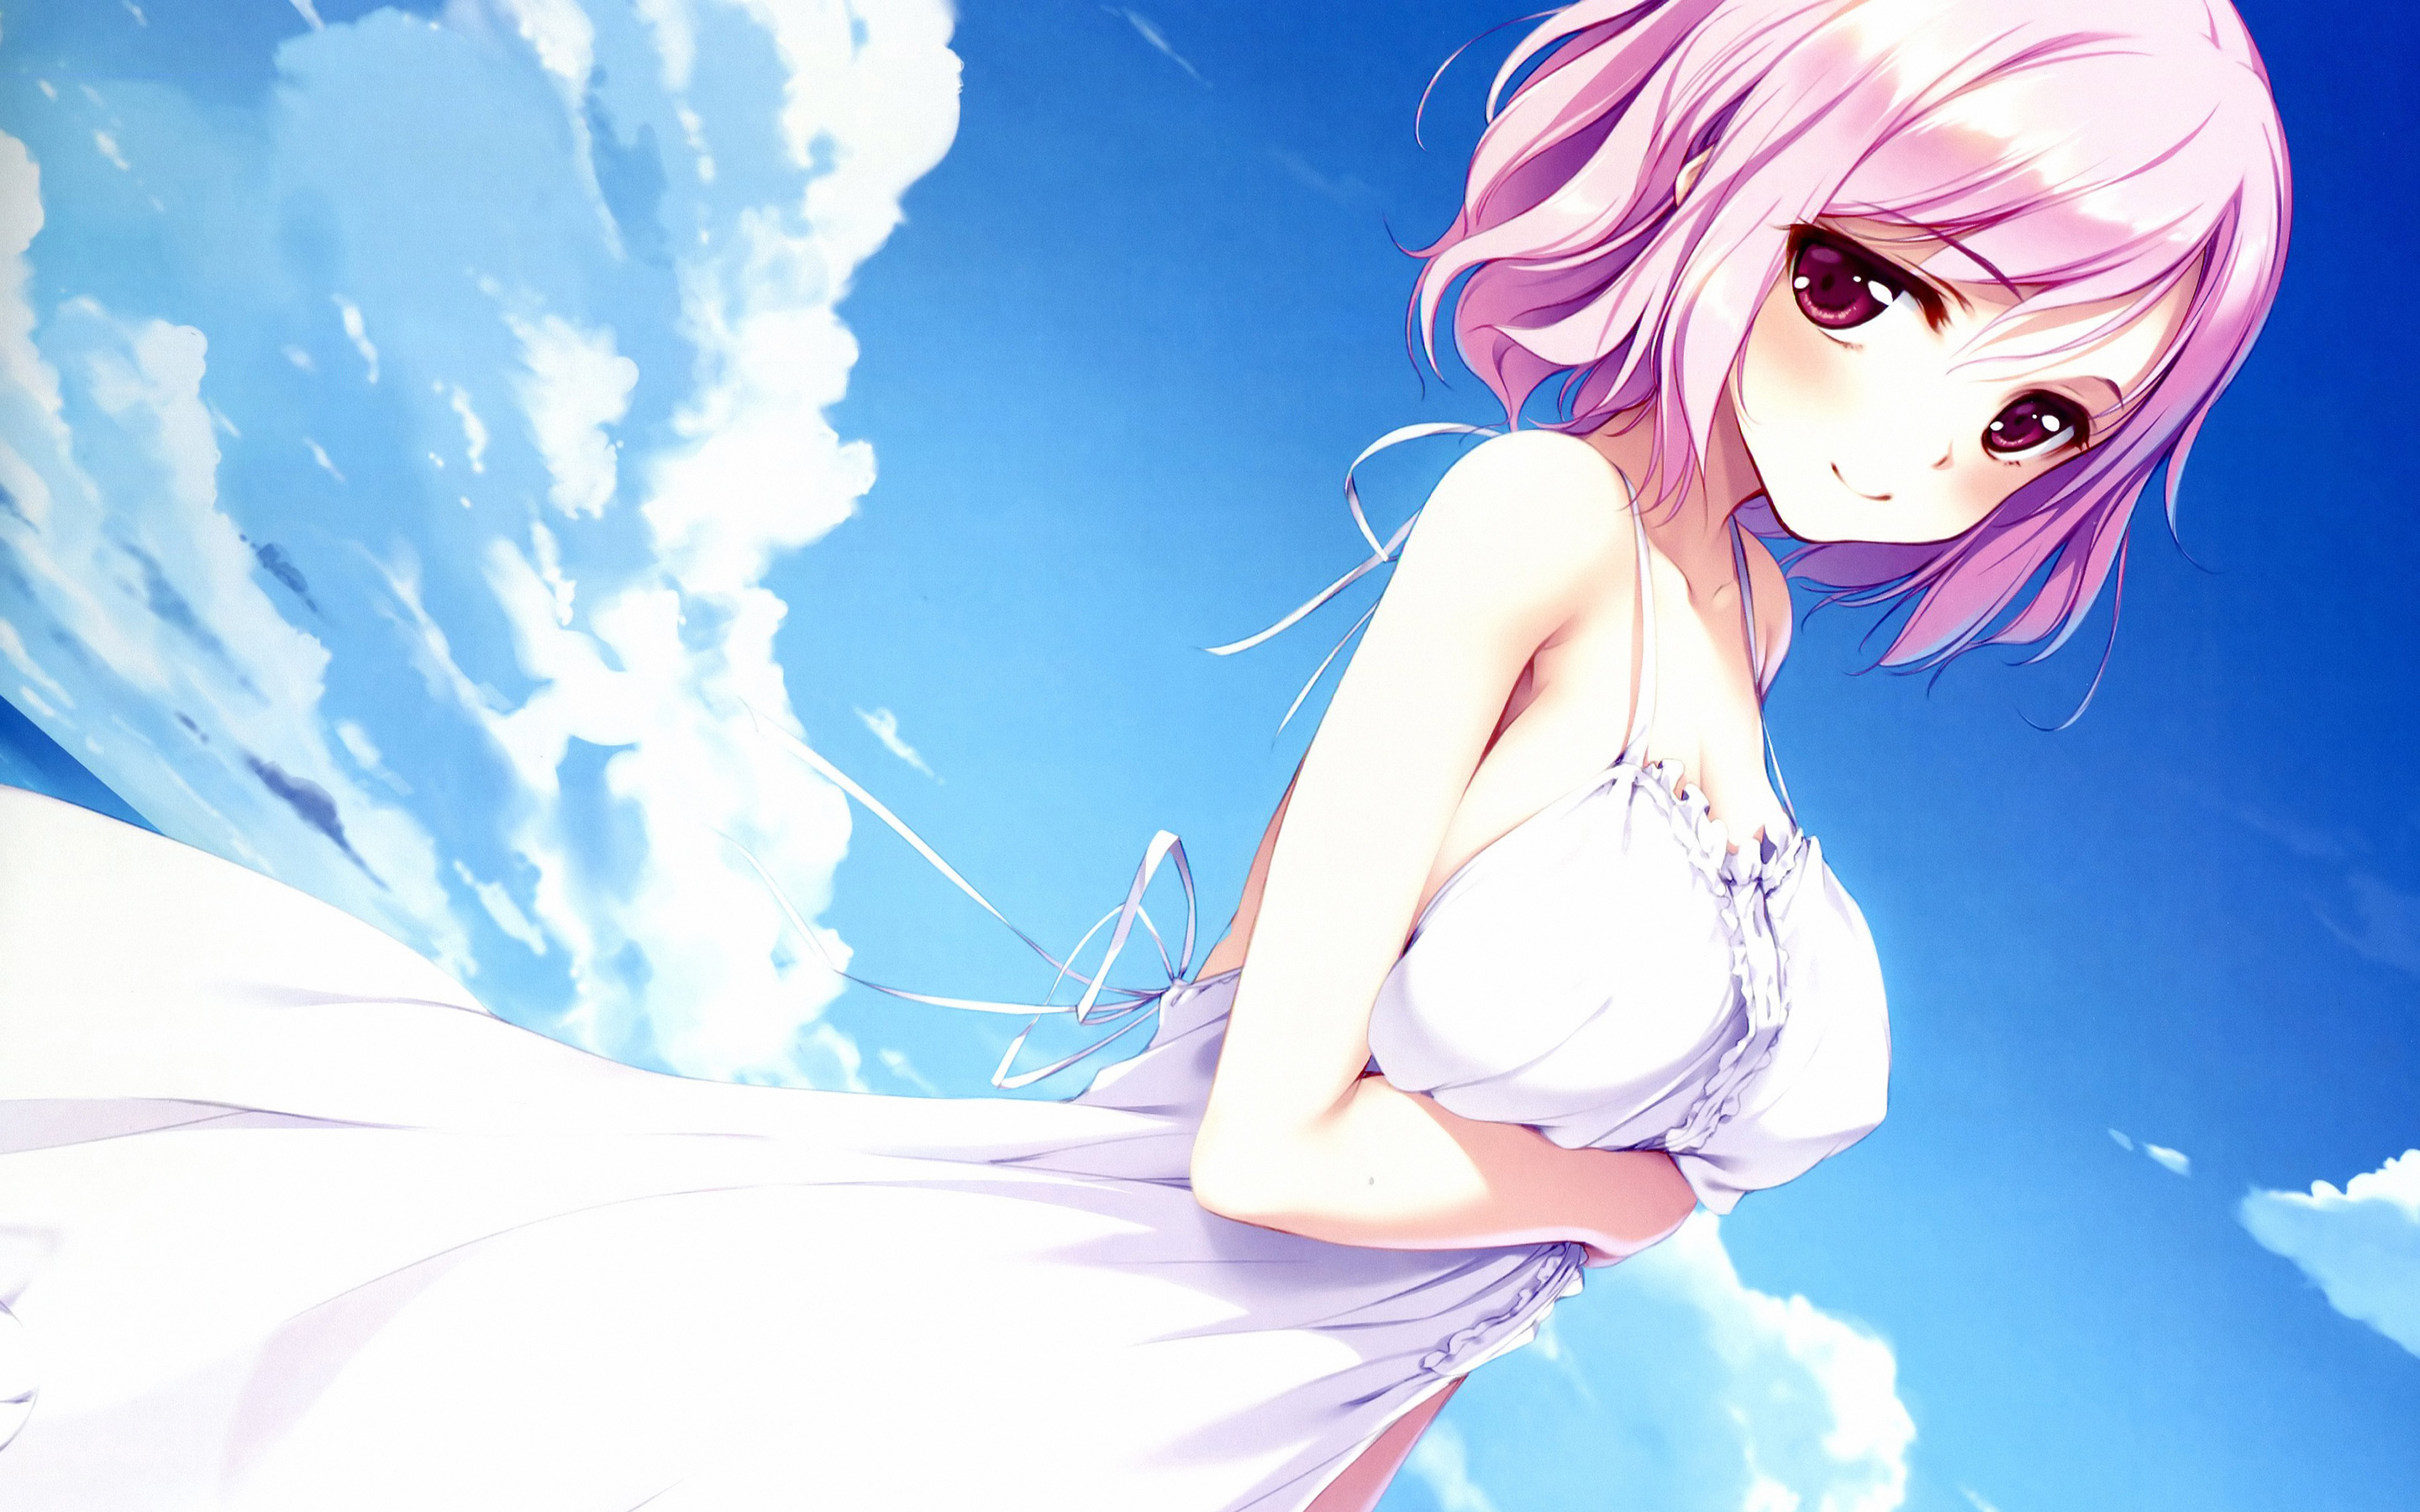 Shy Anime Girl Pink Hair Wallpapers and Free Stock Photos